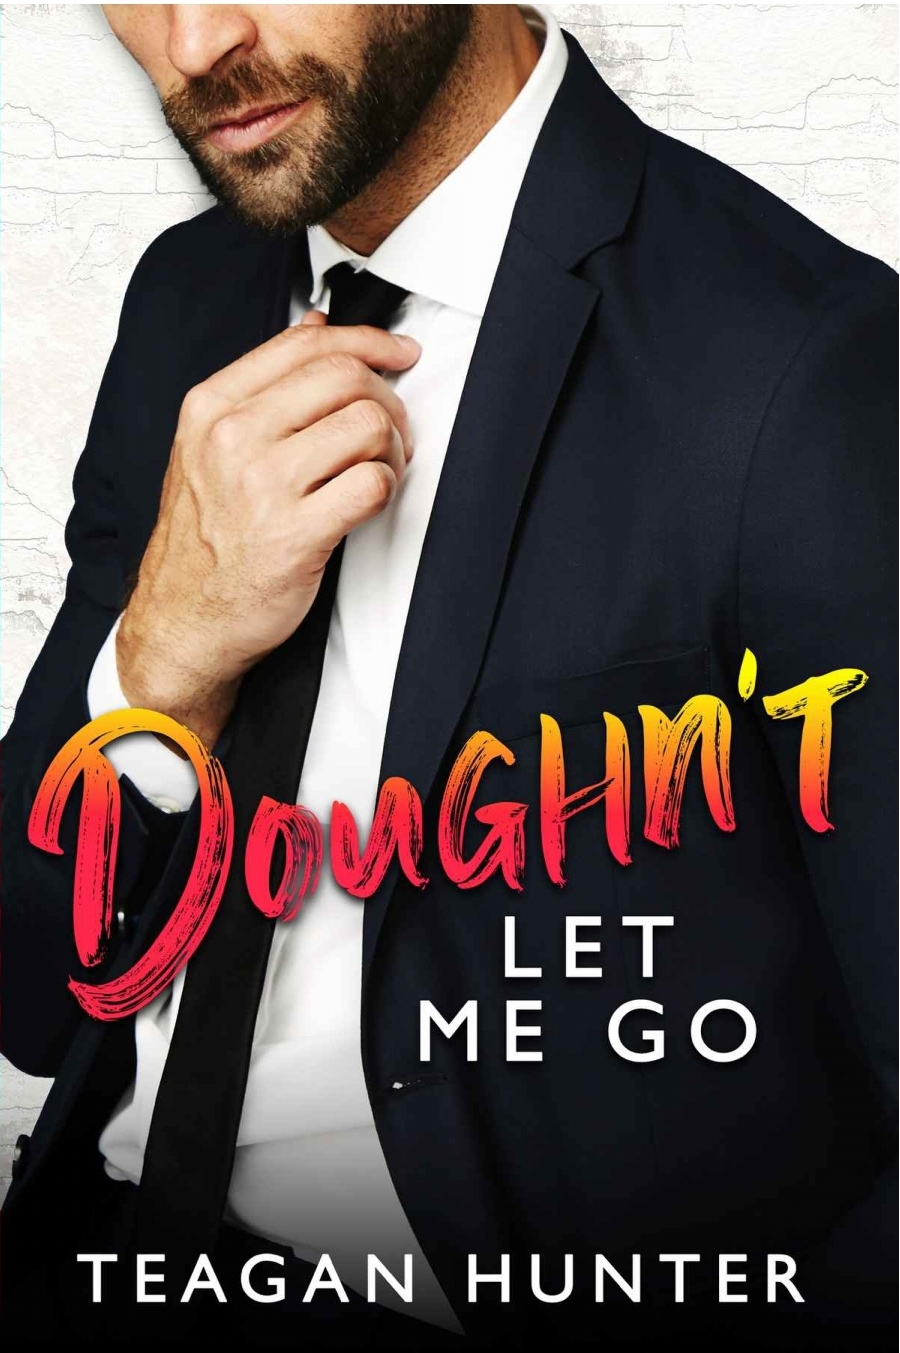 Doughn’t Let Me Go by Teagan Hunter (Book Review) 5 STARS